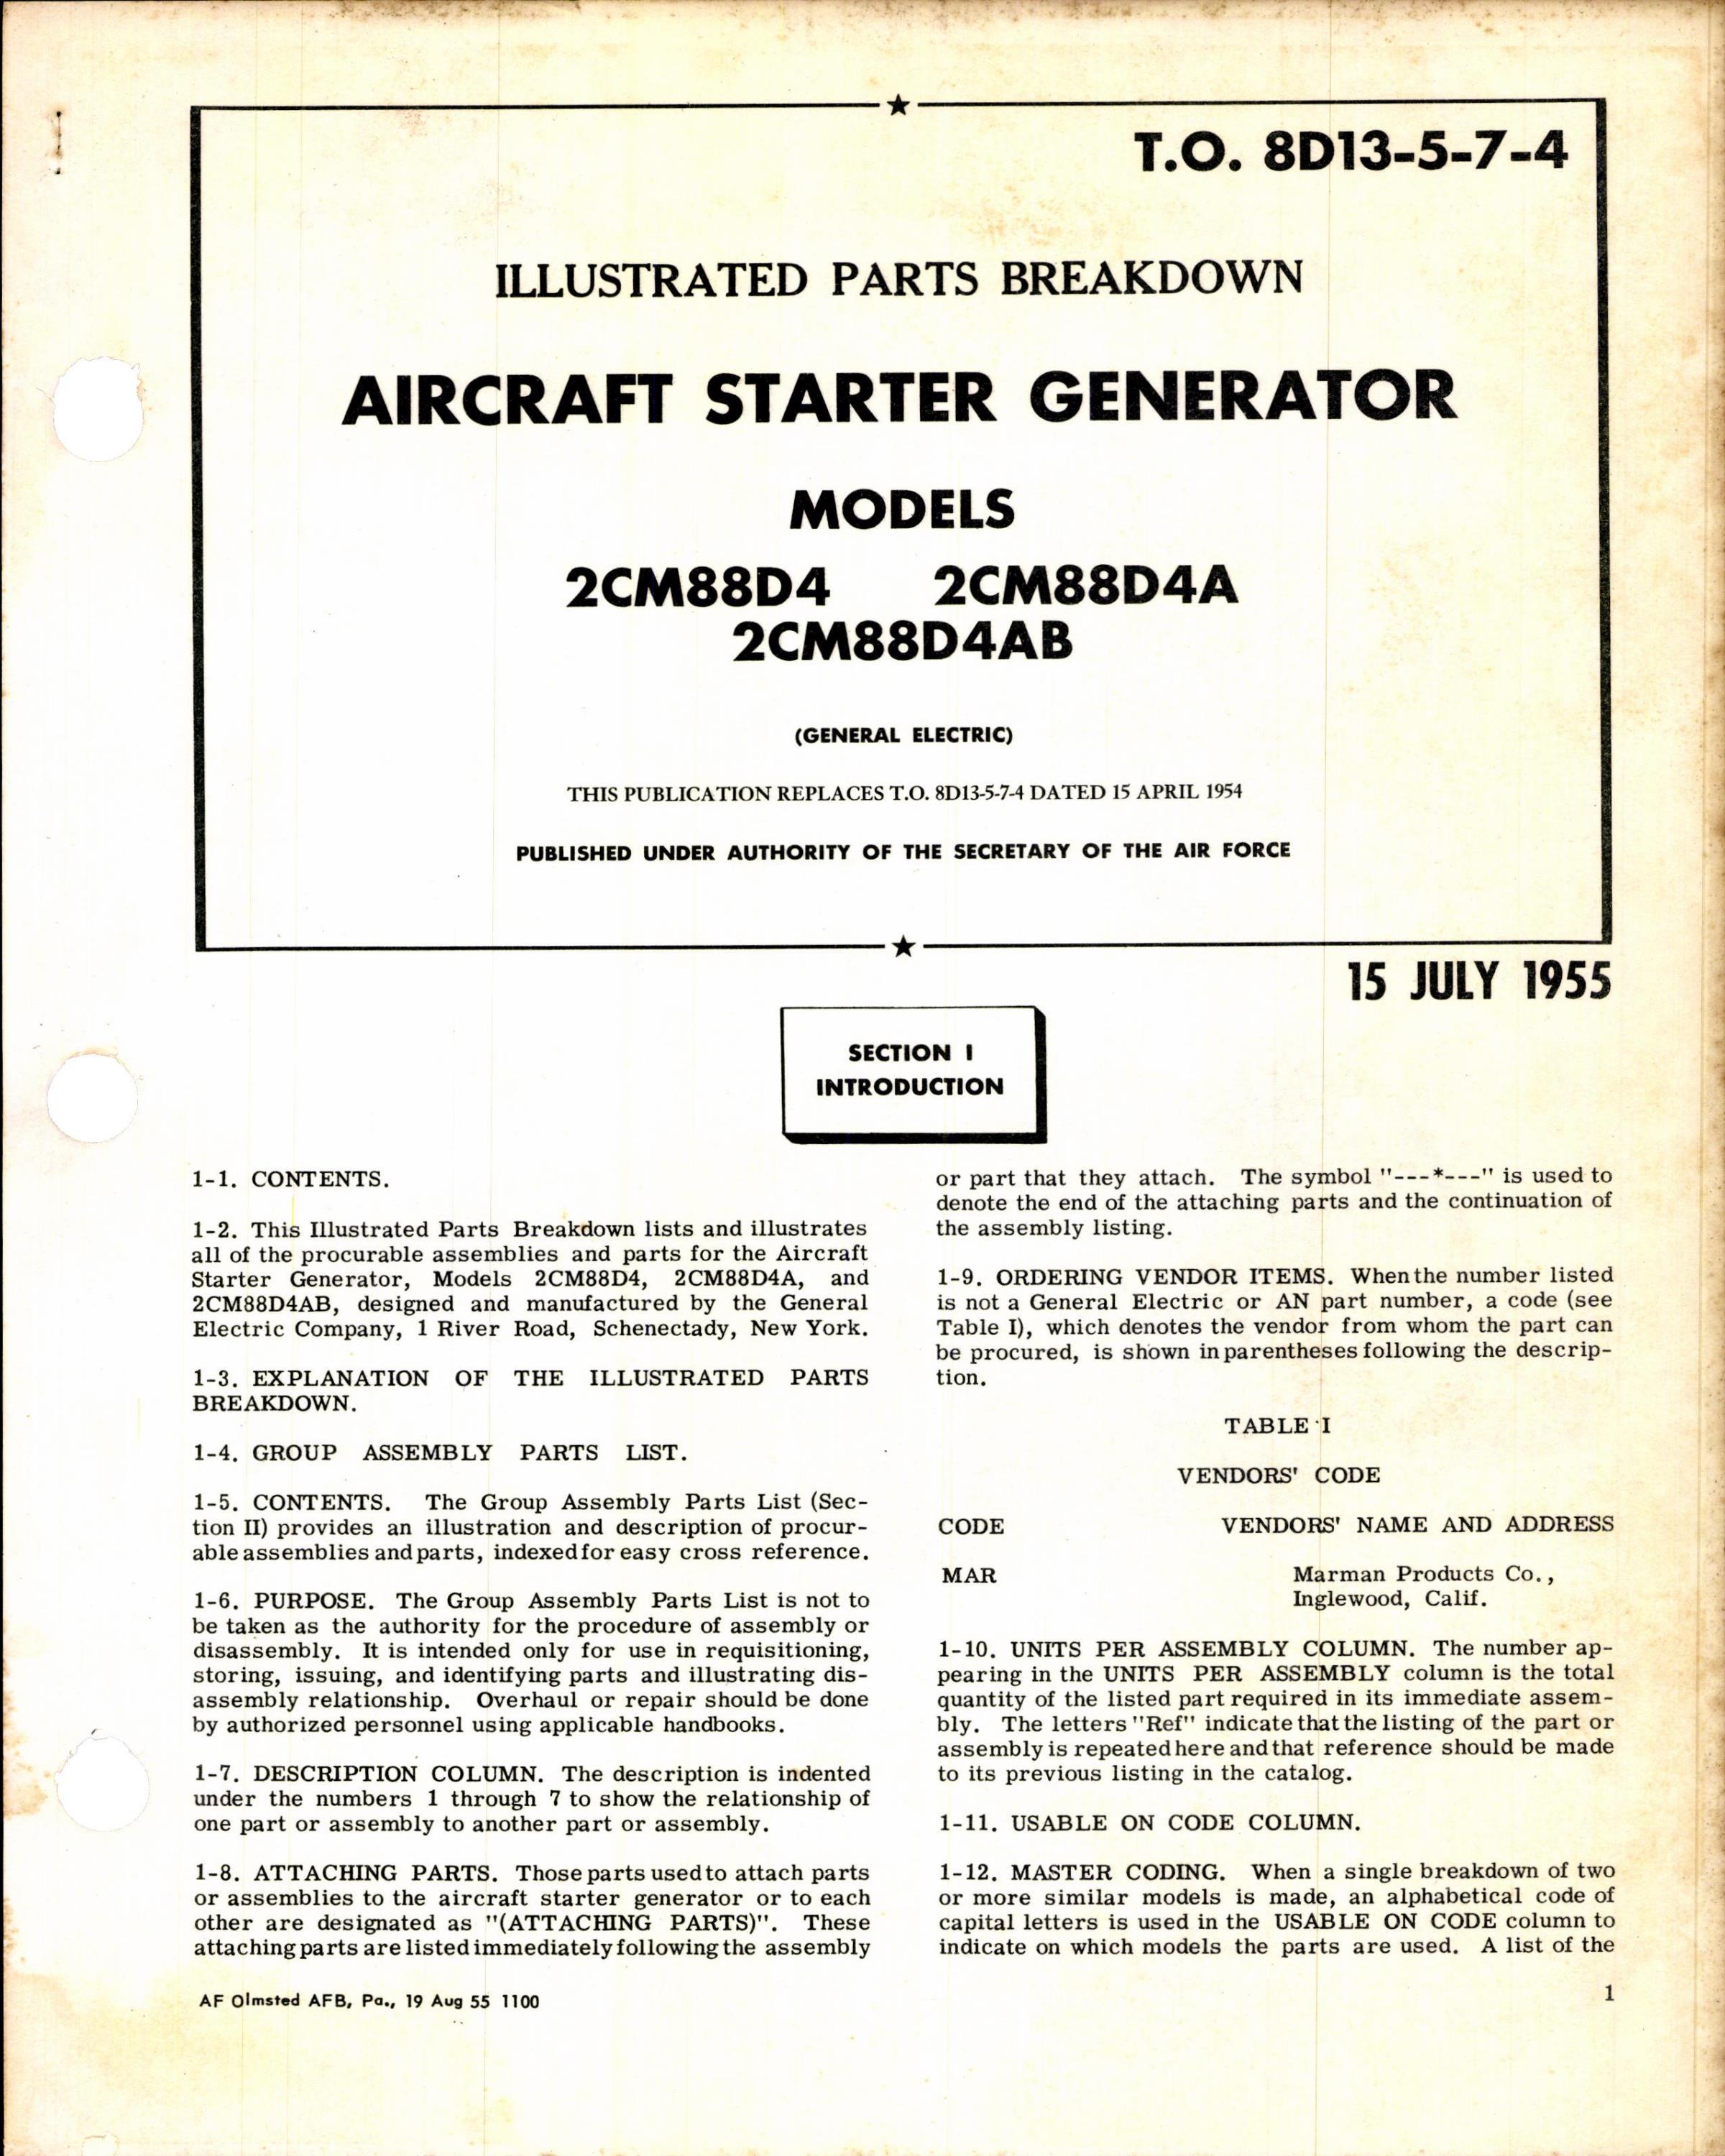 Sample page 1 from AirCorps Library document: Illustrated Parts Breakdown for Aircraft Starter Generator